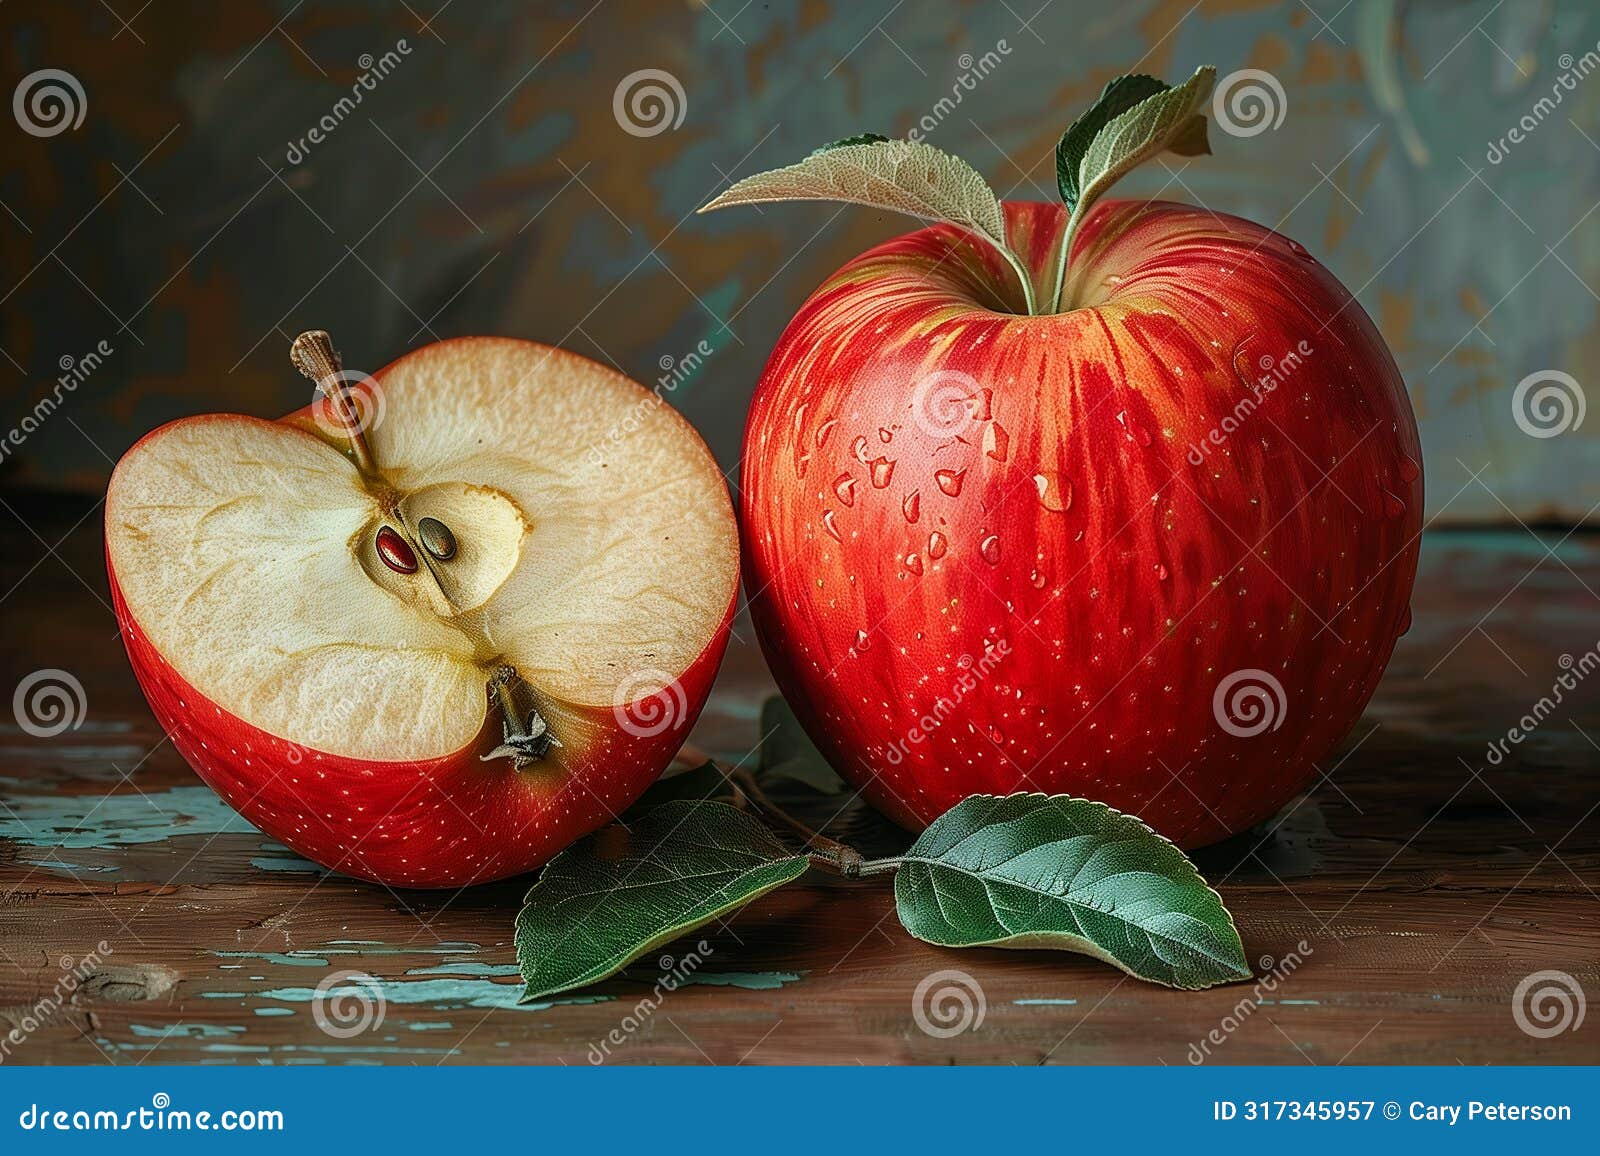 indulge in the tempting delight of a forbidden red apple bite: a